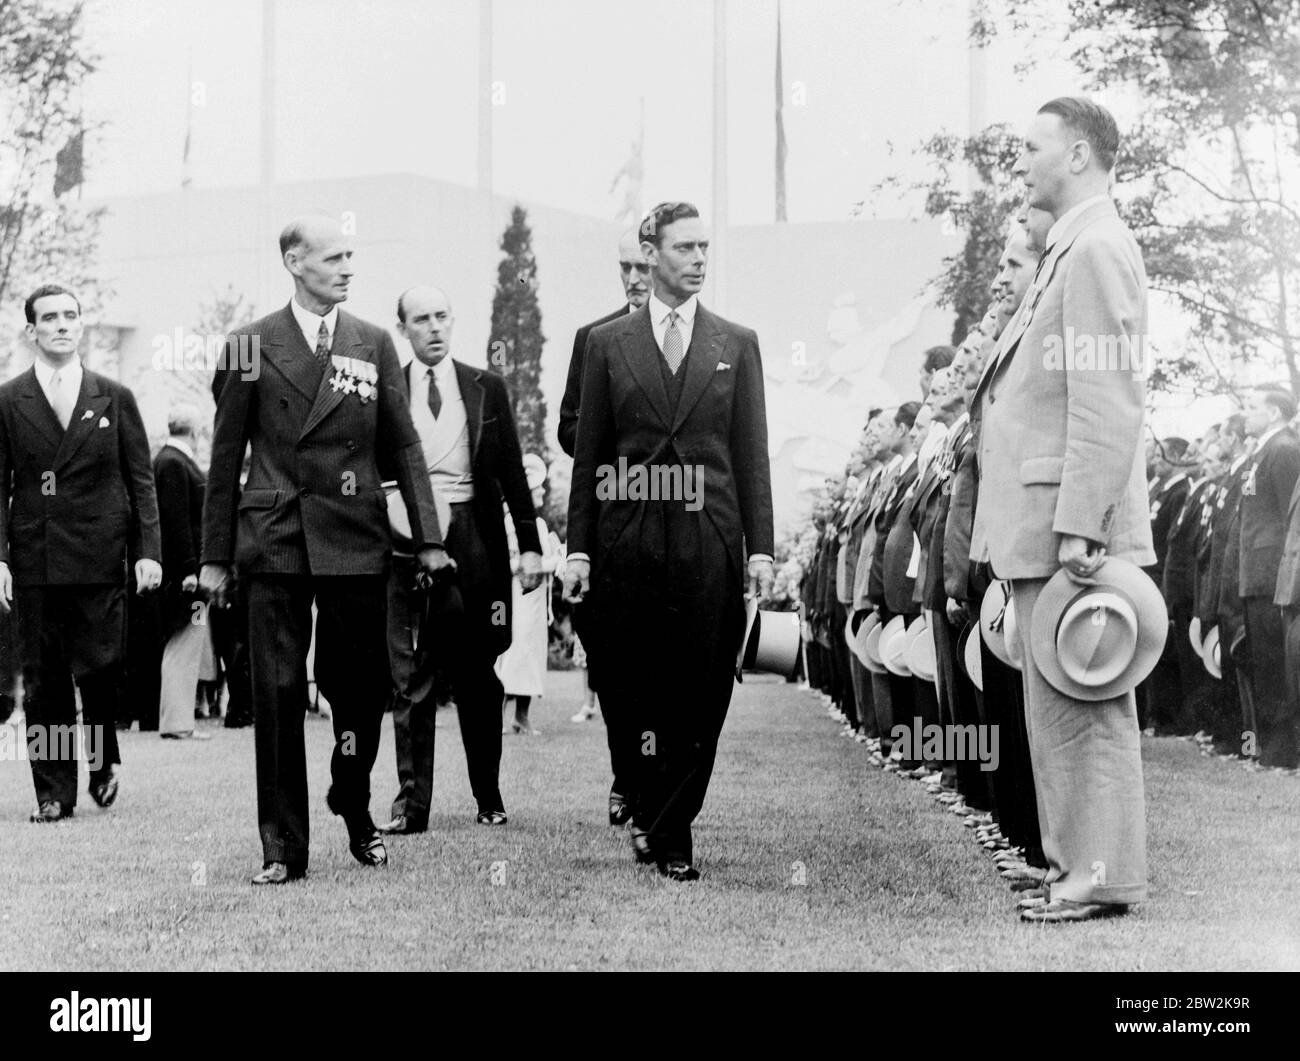 The Royal tour of Canada and the USA by King George VI and Queen Elizabeth , 1939 The King inspecting the Guard of Honour when they visited the British Pavilion at the New York World ' s Fai r. Stock Photo